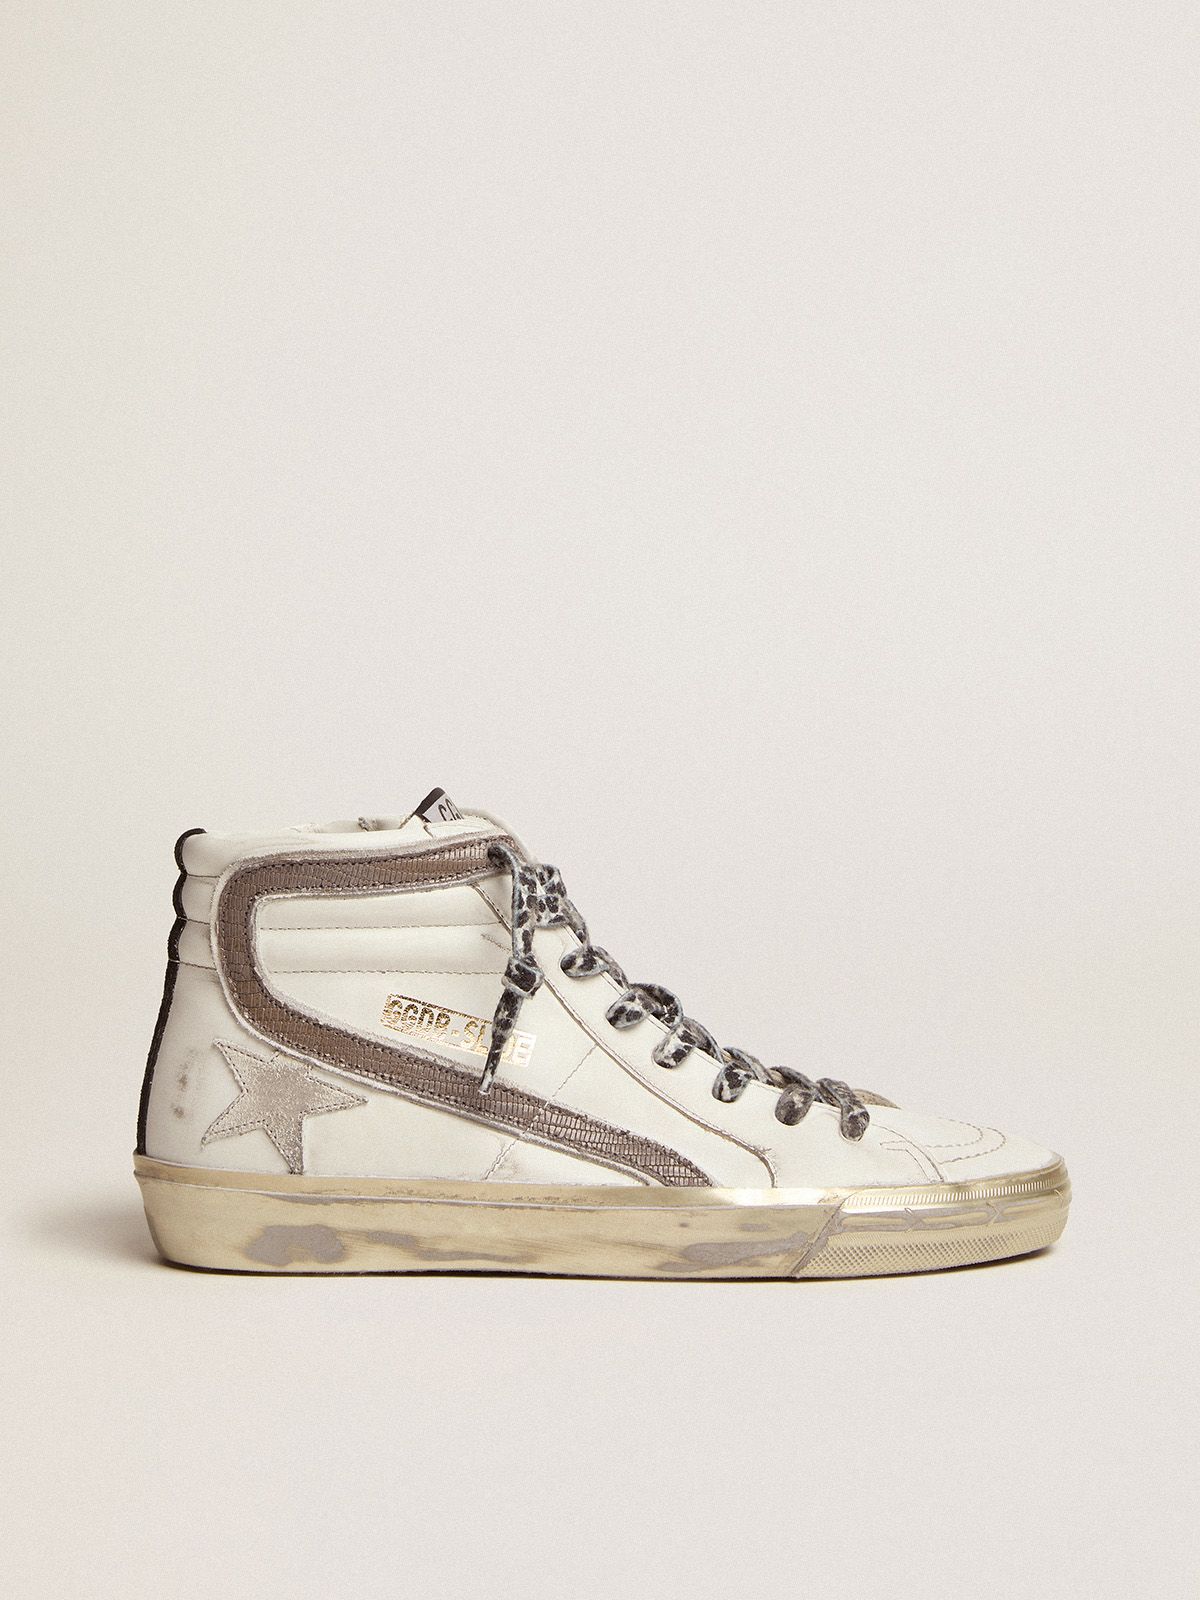 golden goose dove-gray white with suede flash Slide and lizard-print star sneakers leather